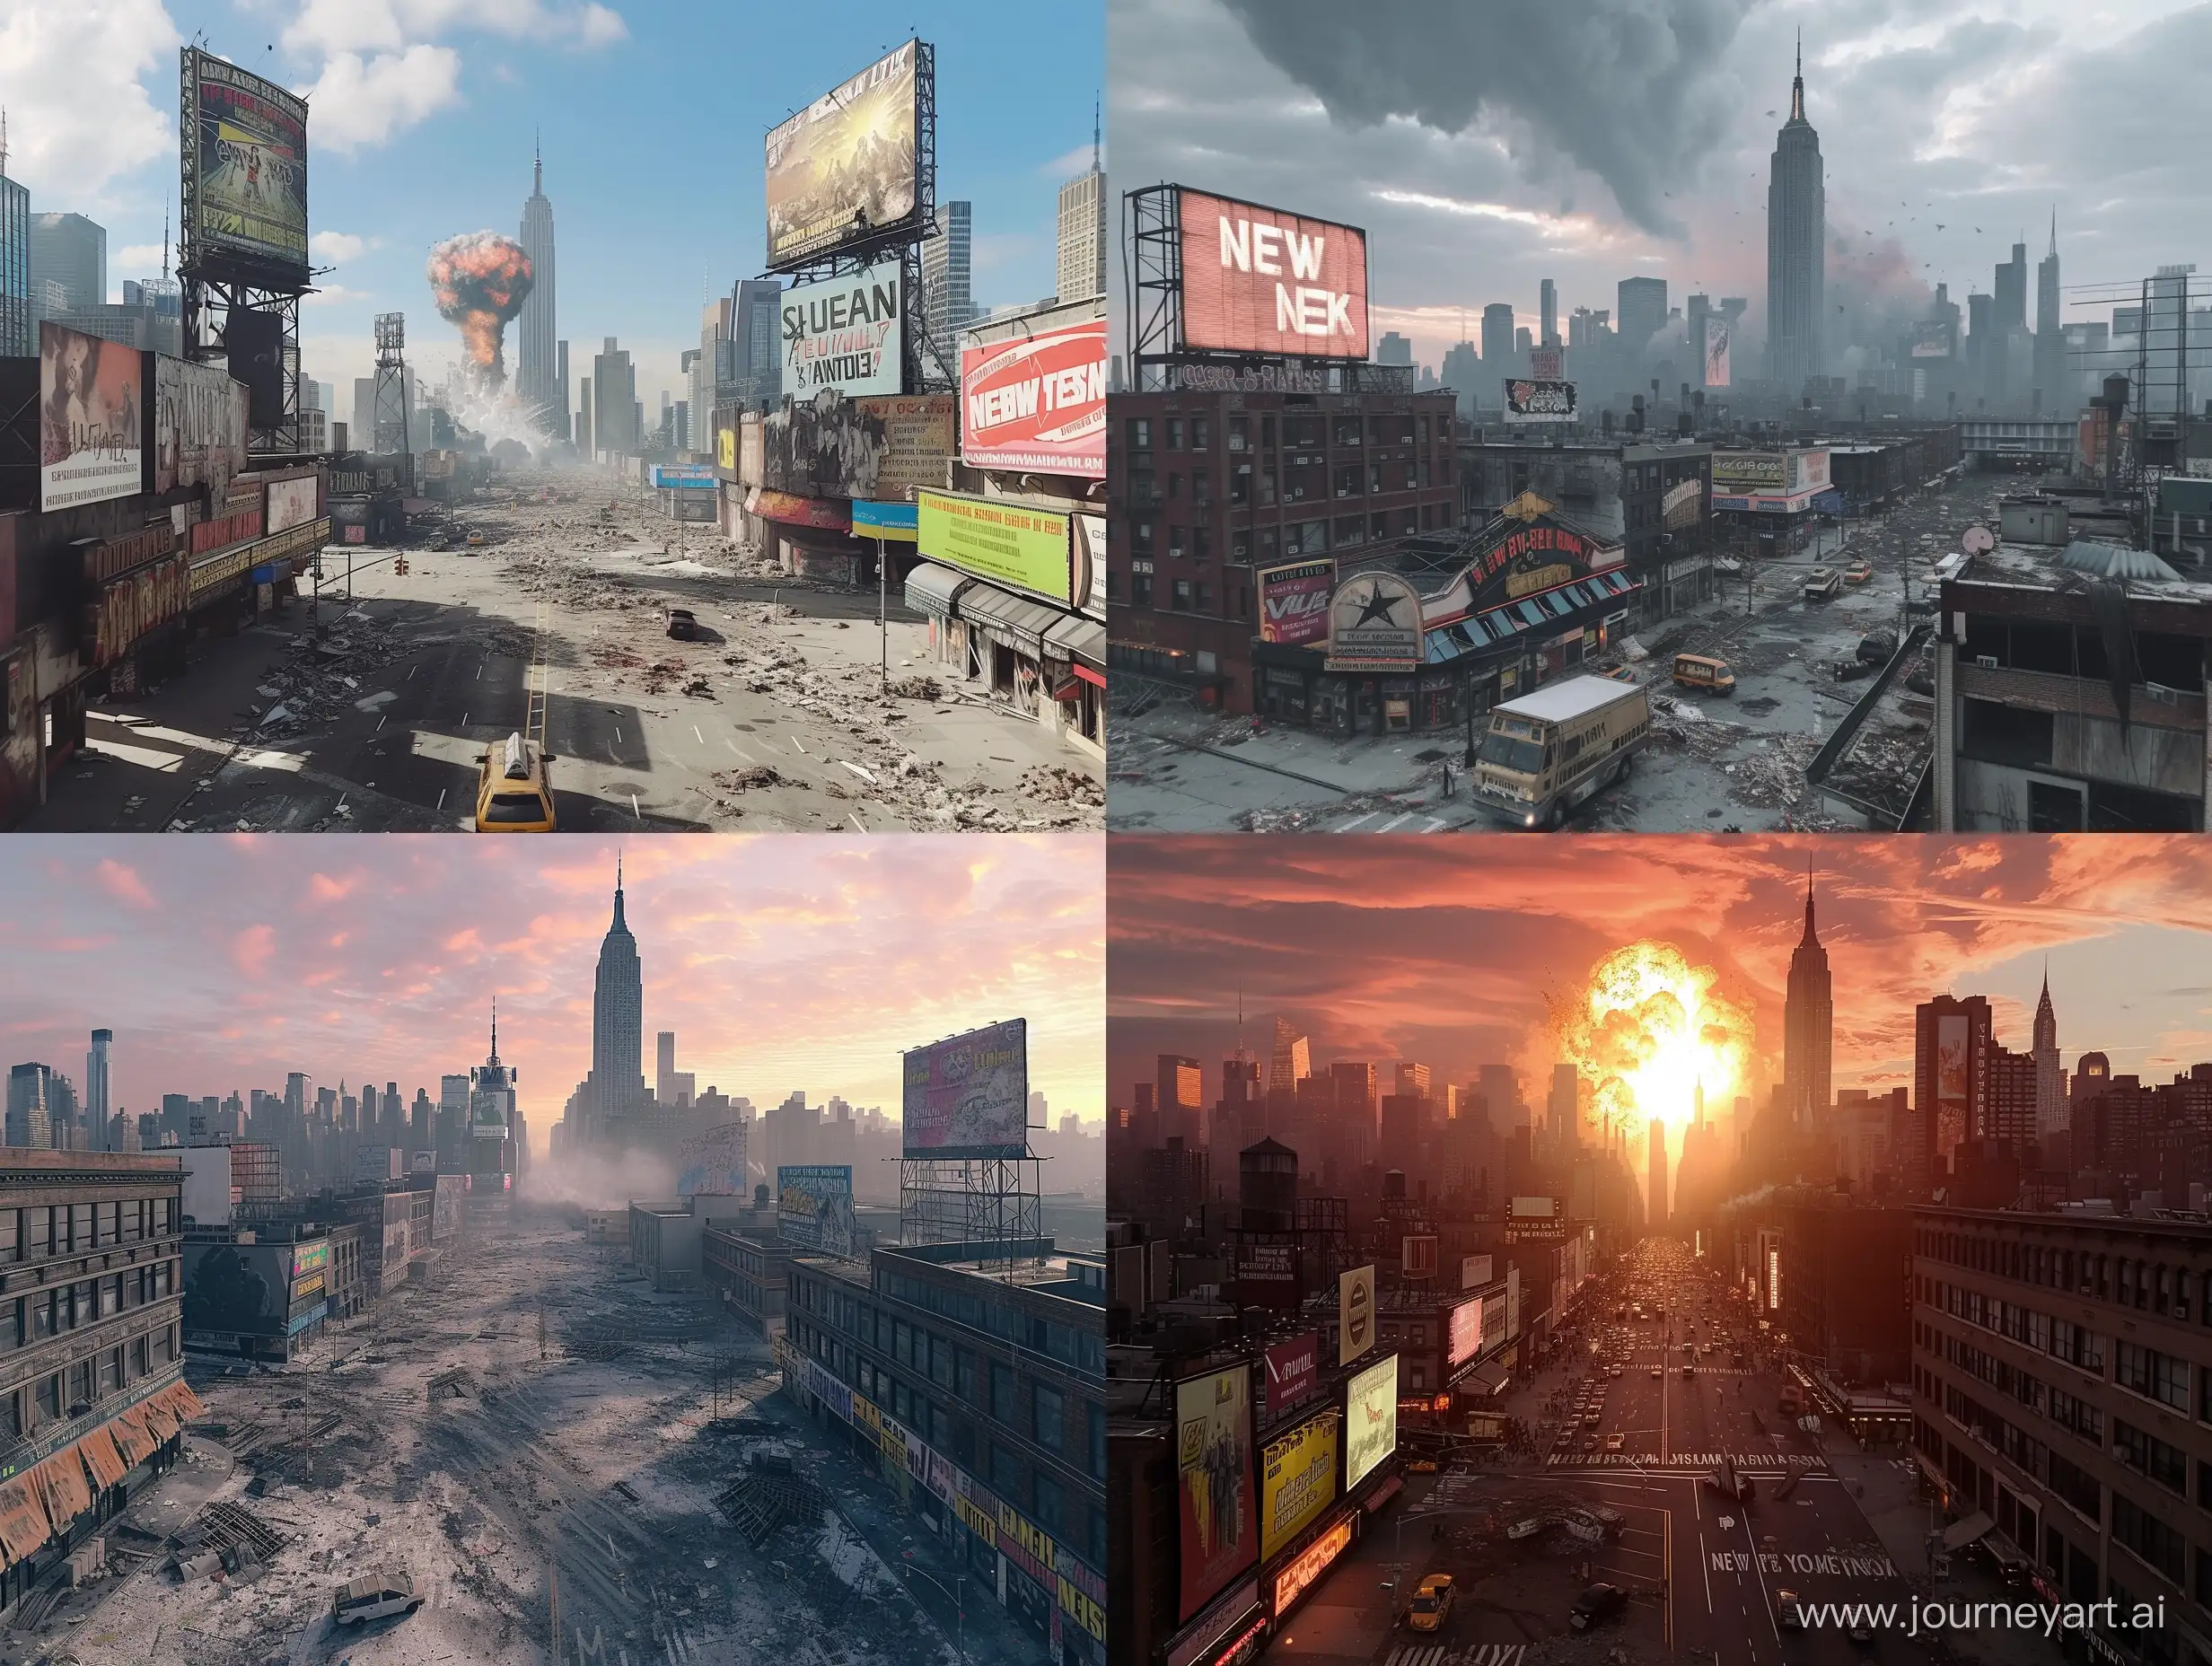 New-York-Aftermath-Capturing-the-Devastation-in-a-Detailed-Drone-View